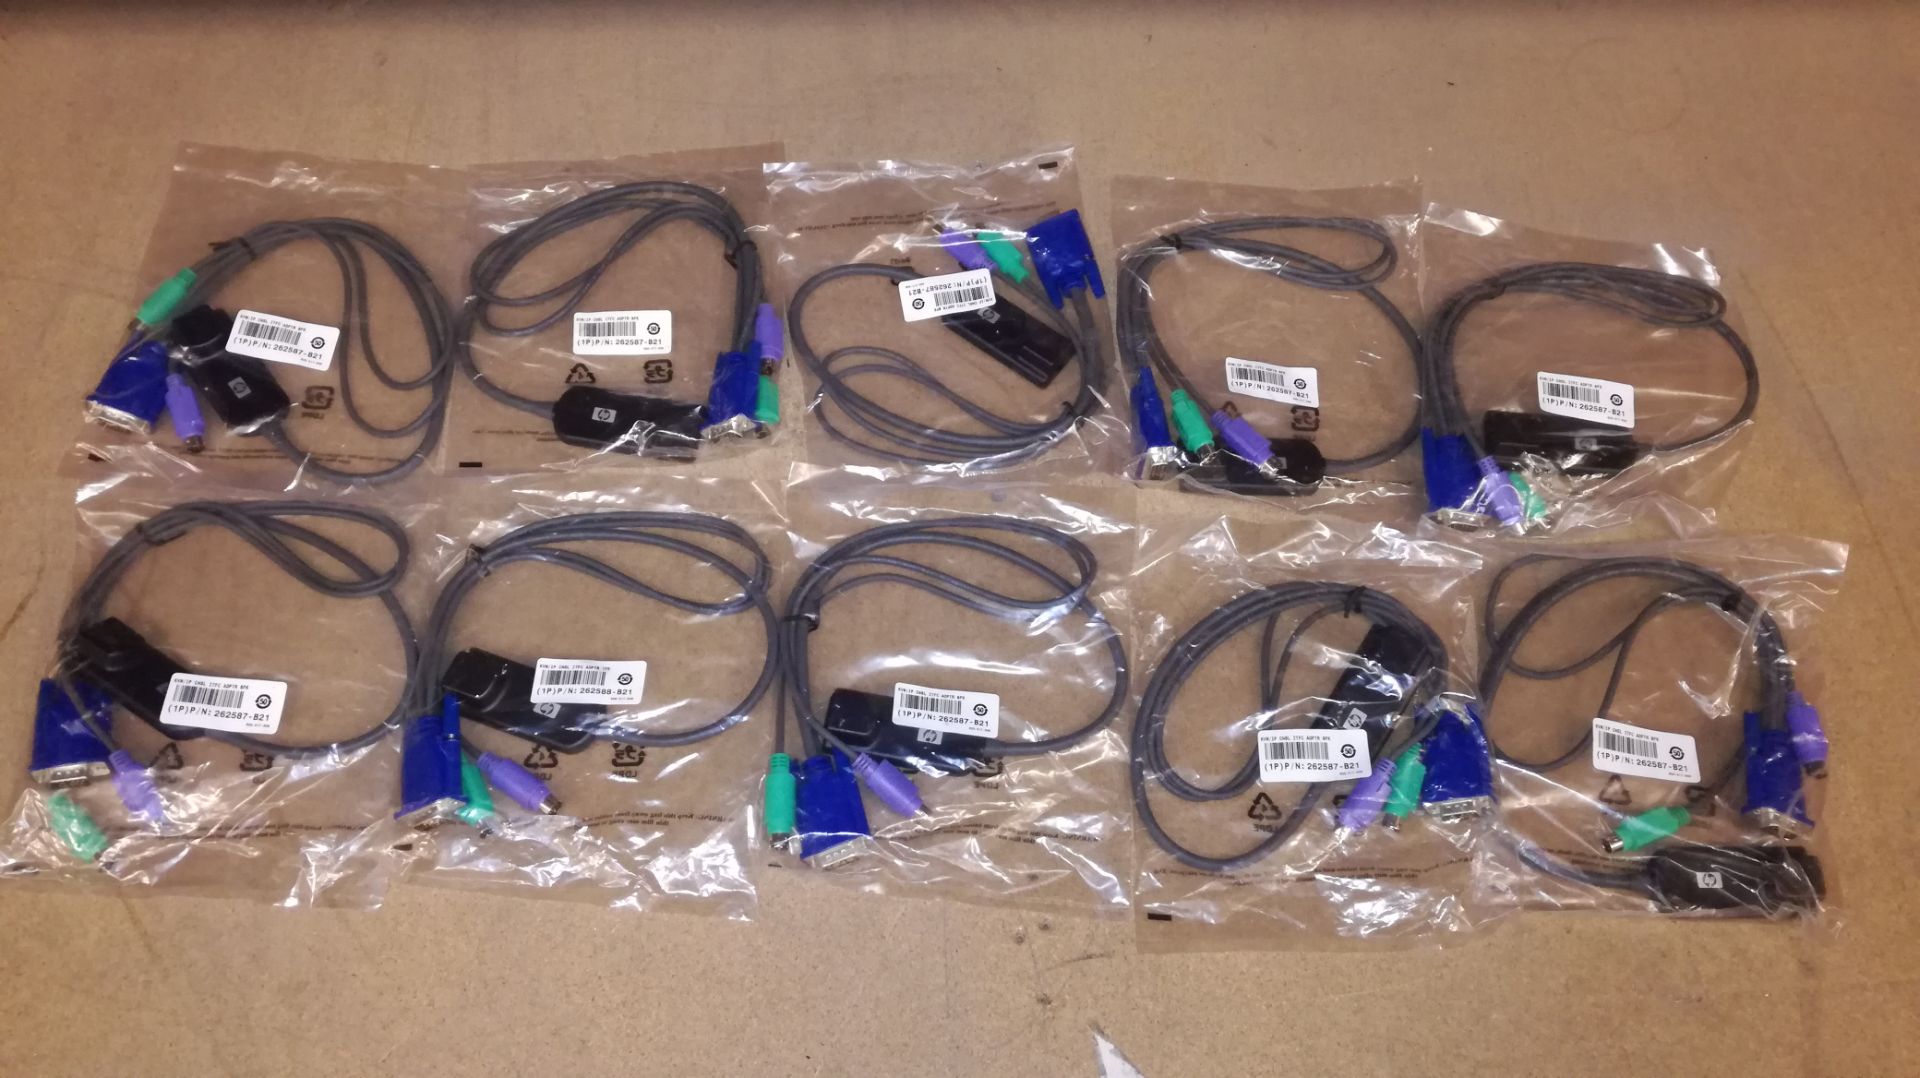 BOX CONTAINING 10X HP KVM/IP INTERFACE ADAPTER CABLES 262587-B21